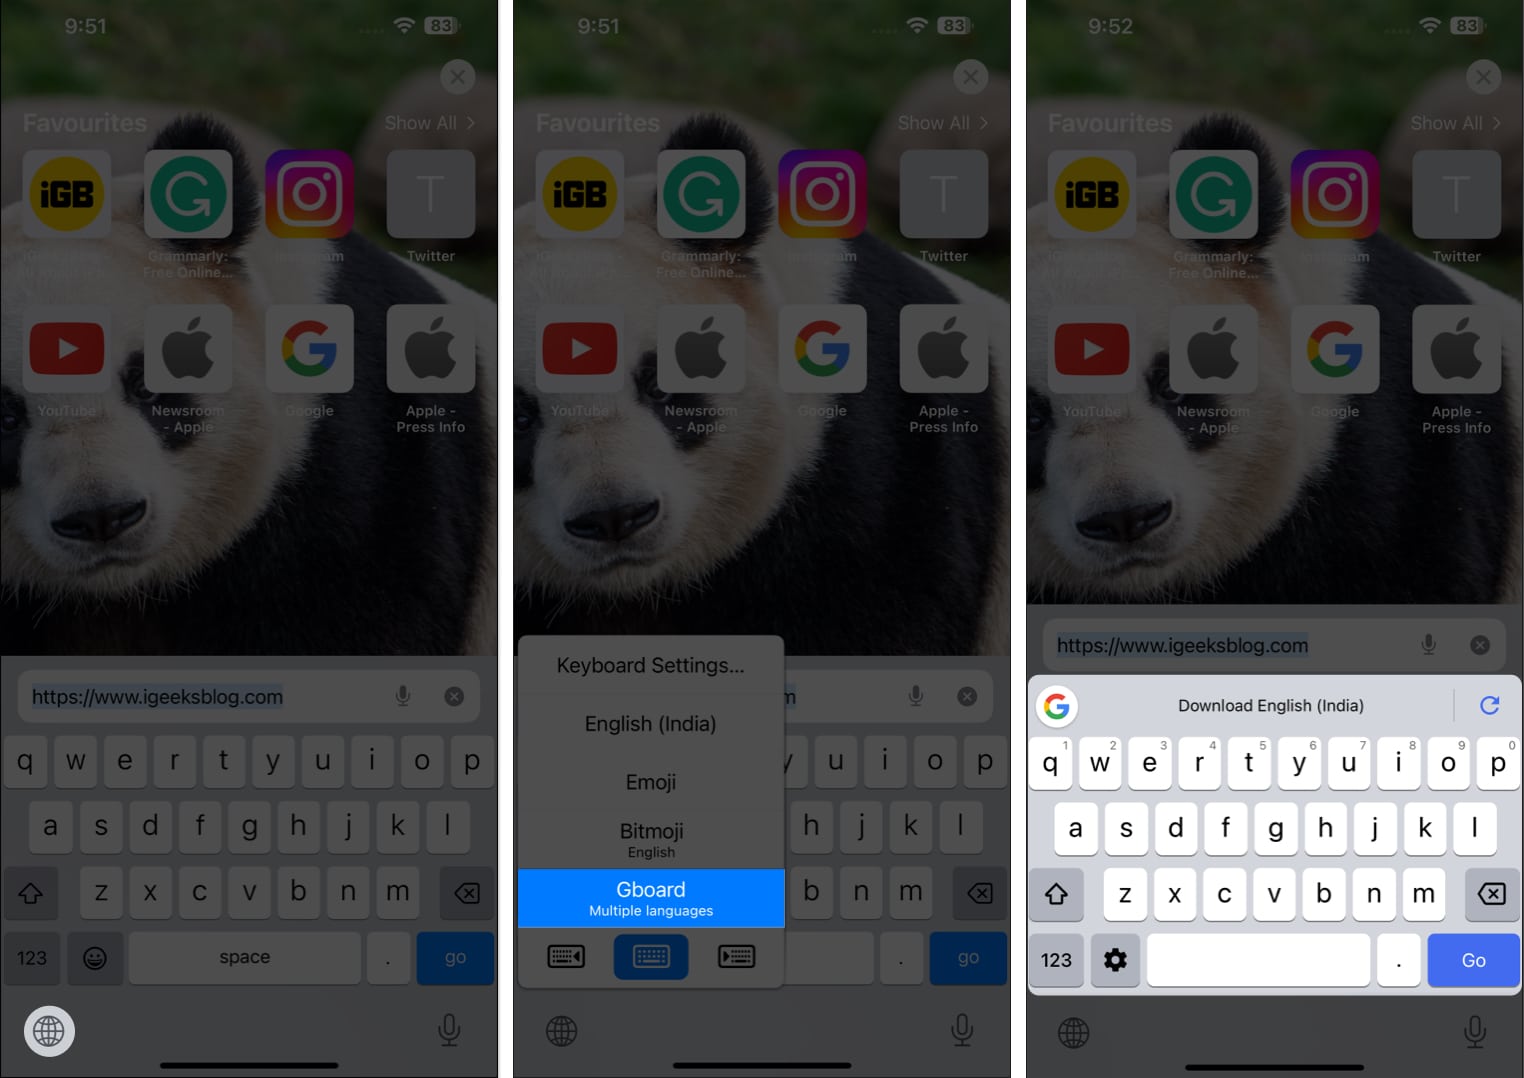 Select Gboard with Globe icon